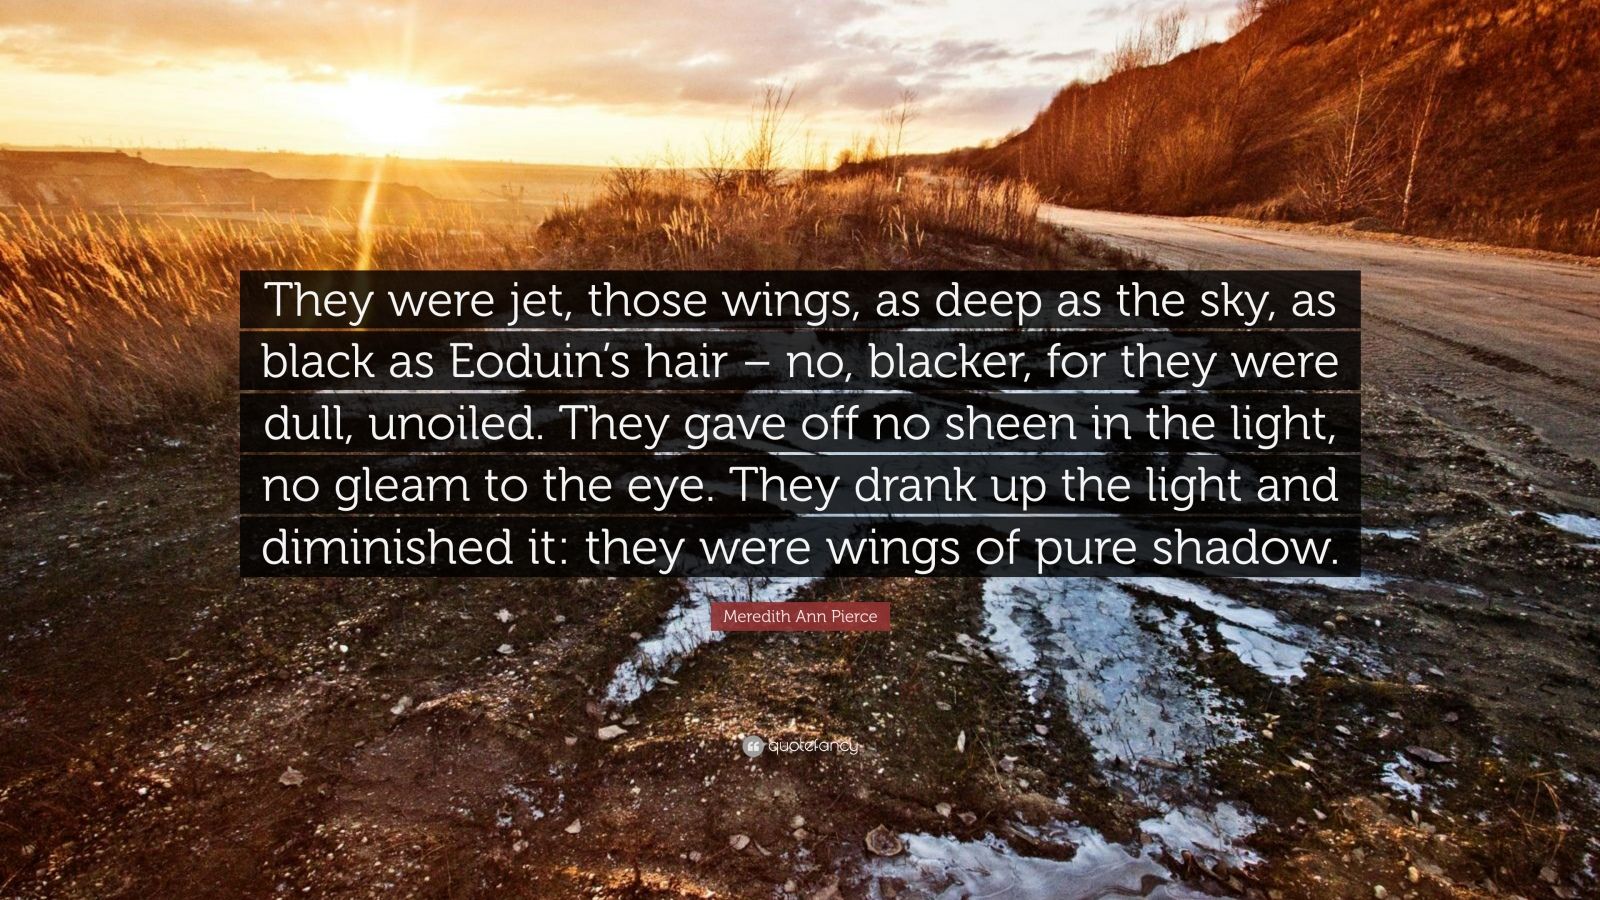 Meredith Ann Pierce Quote: “They were jet, those wings, as deep as